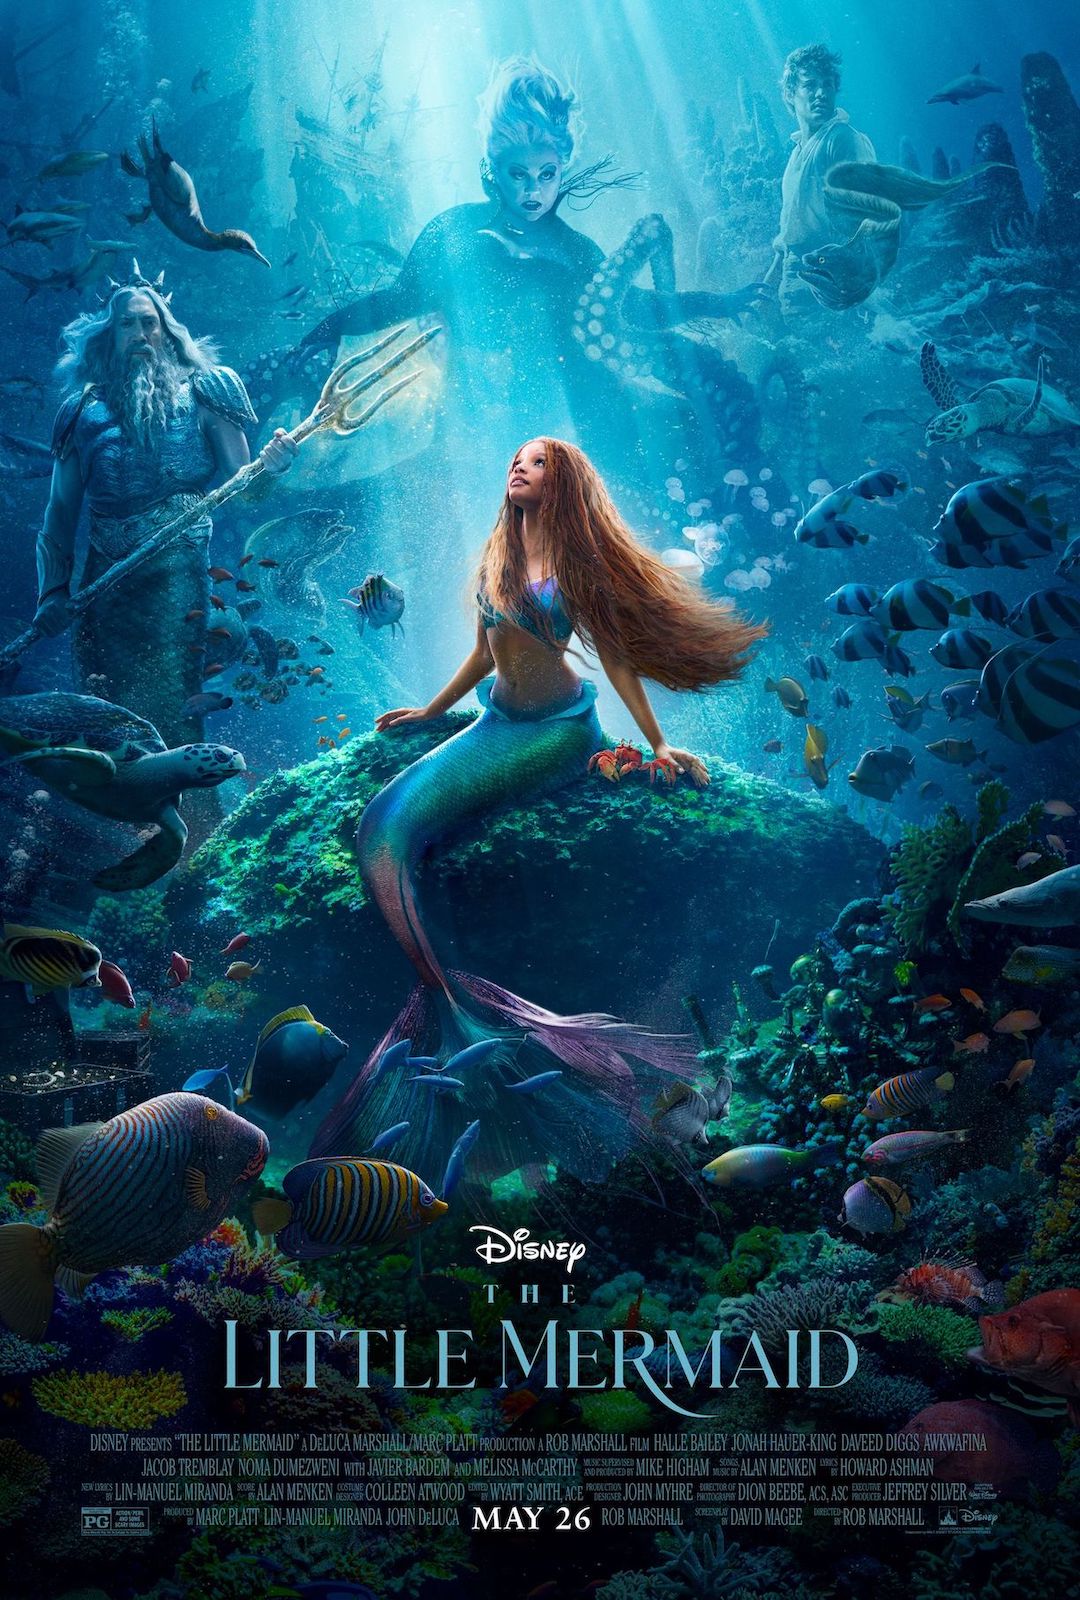 `The Little Mermaid` poster courtesy of The Walt Disney Studios // ©Disney 2022. All rights reserved.